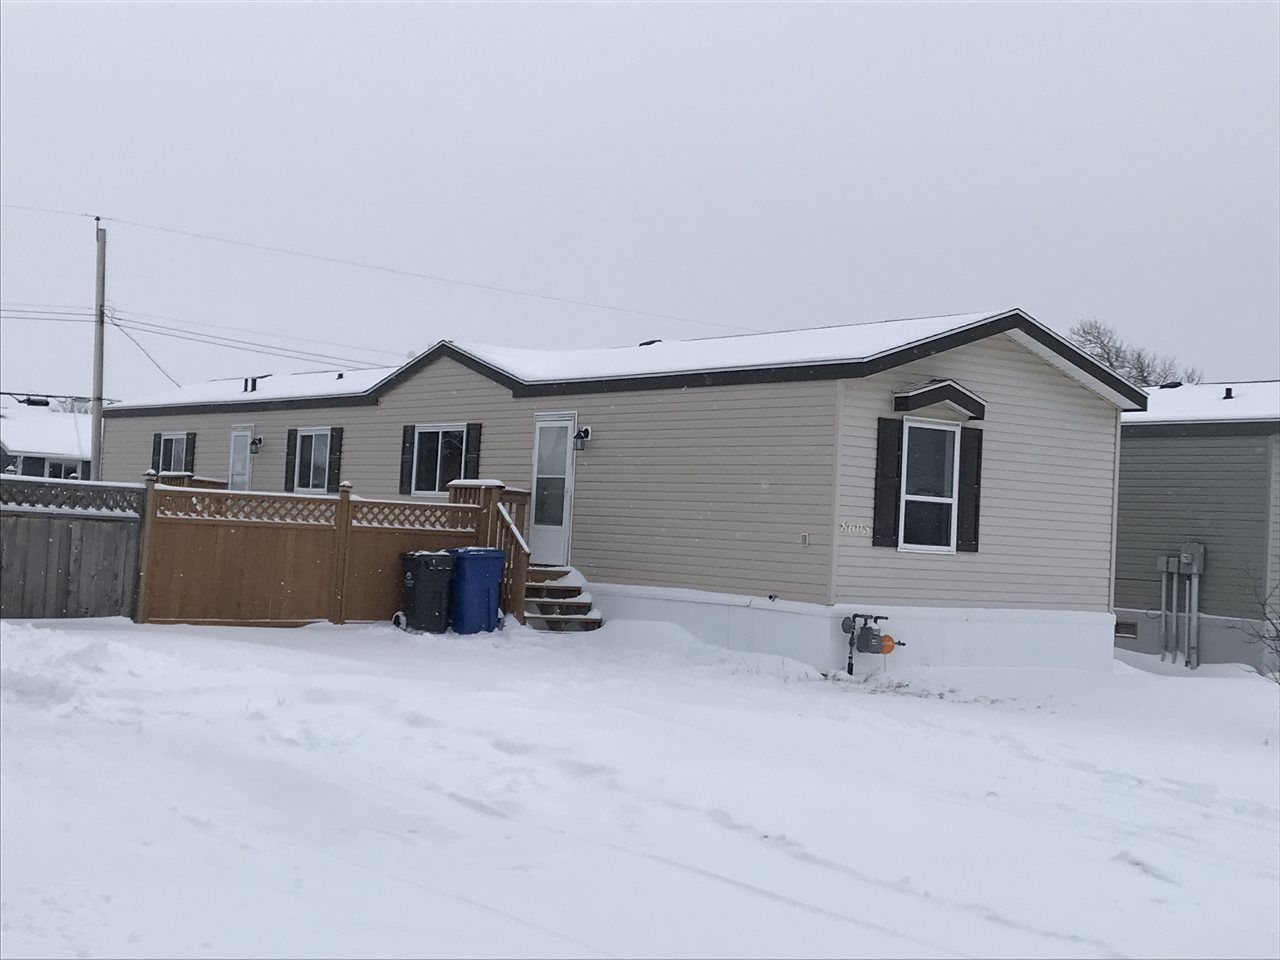 Main Photo: 8605 79A STREET in : Fort St. John - City SE House for sale : MLS®# R2428485